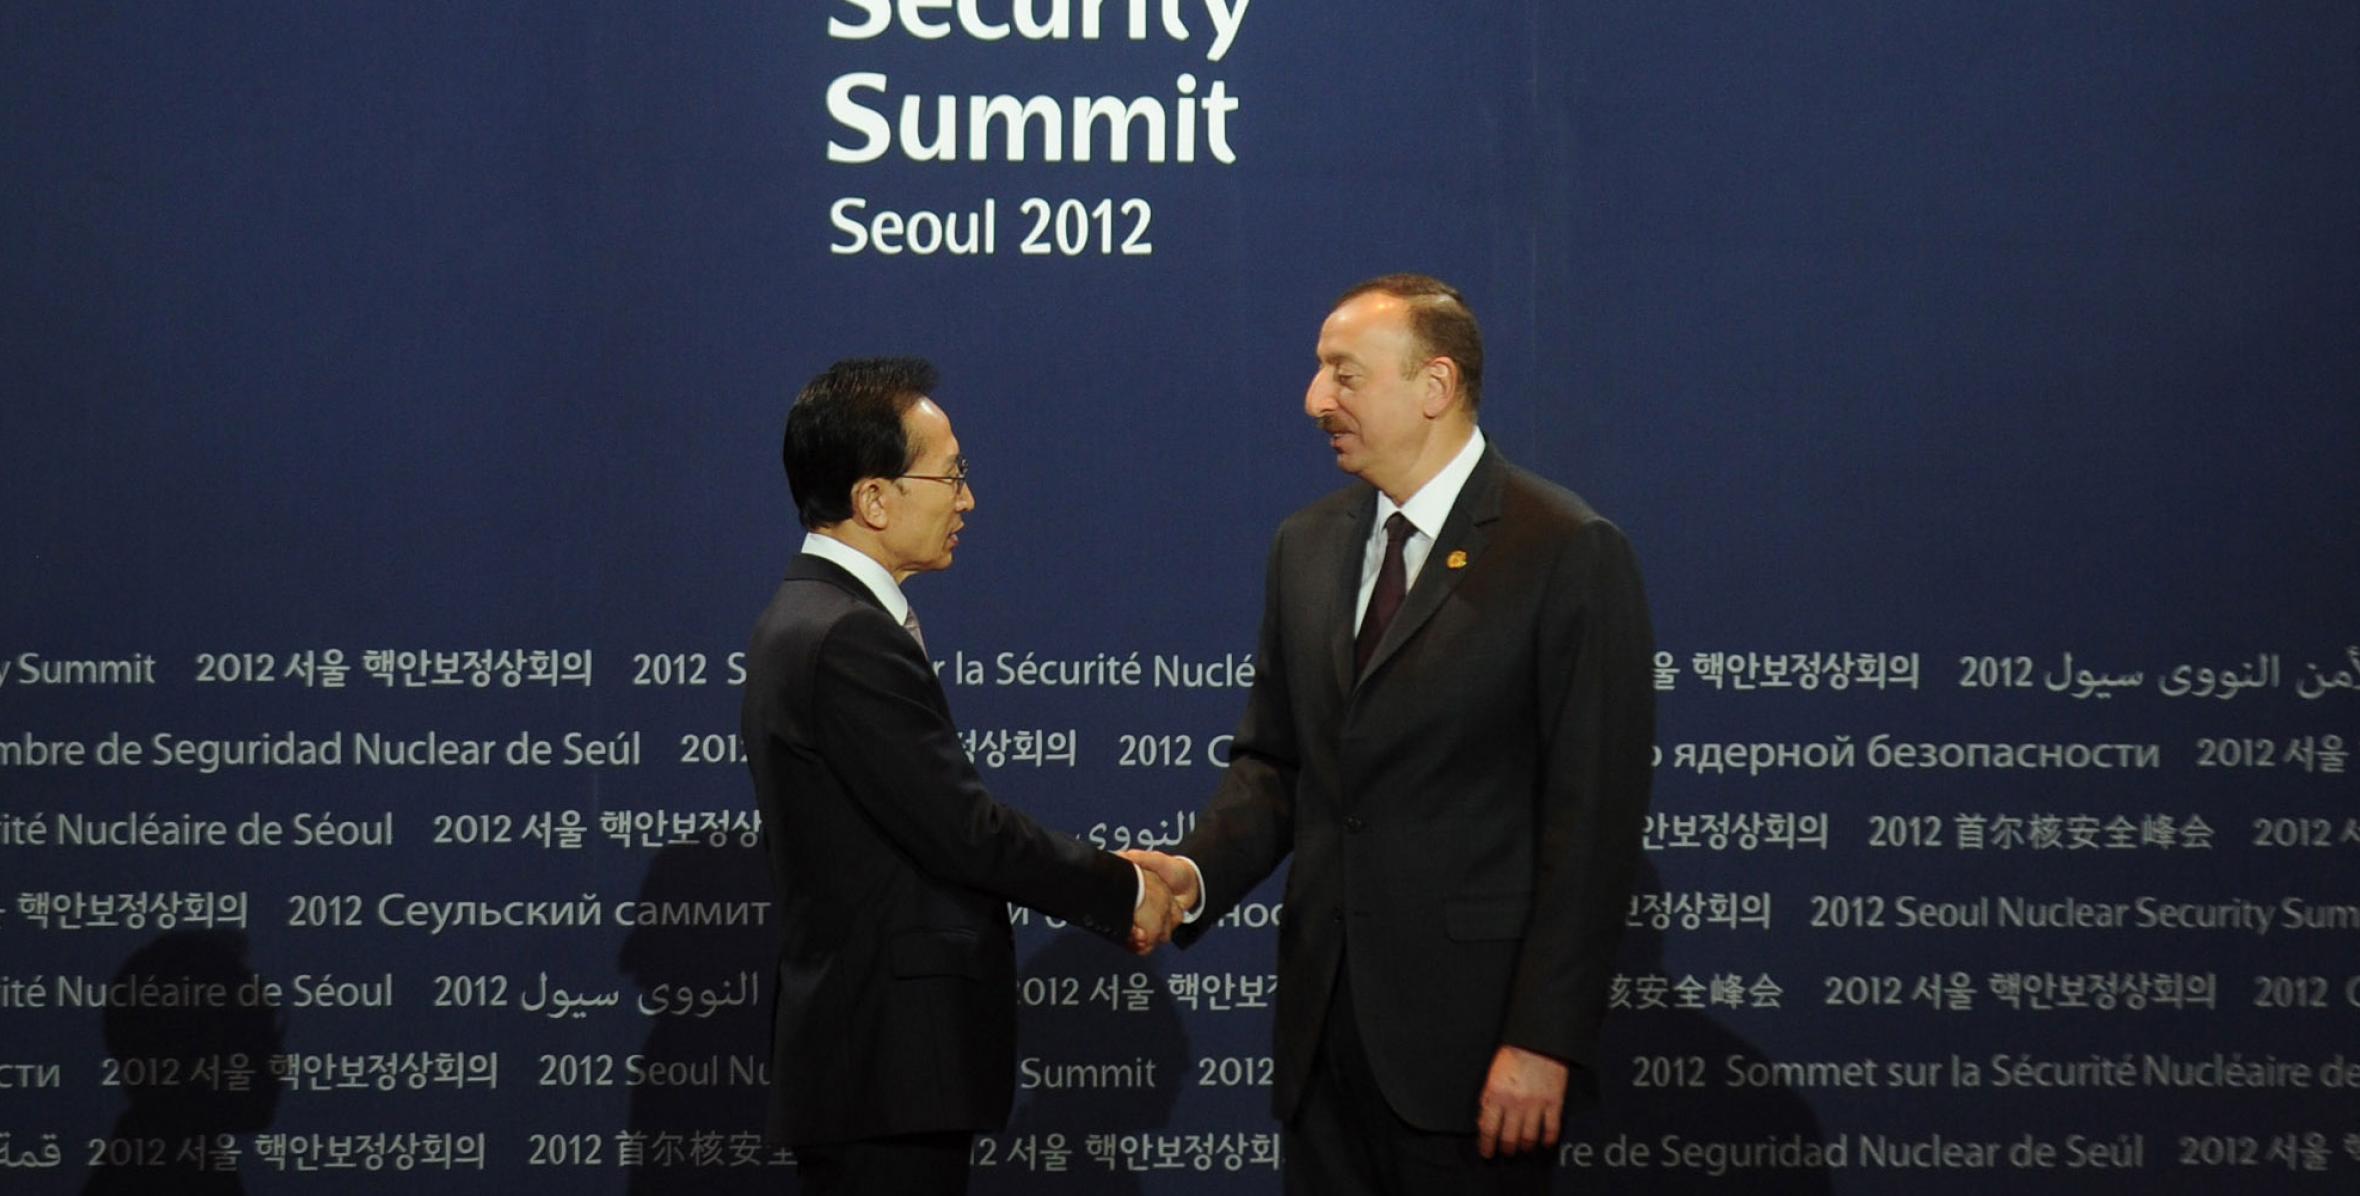 Ilham Aliyev attended the Seoul Nuclear Security Summit in Seoul